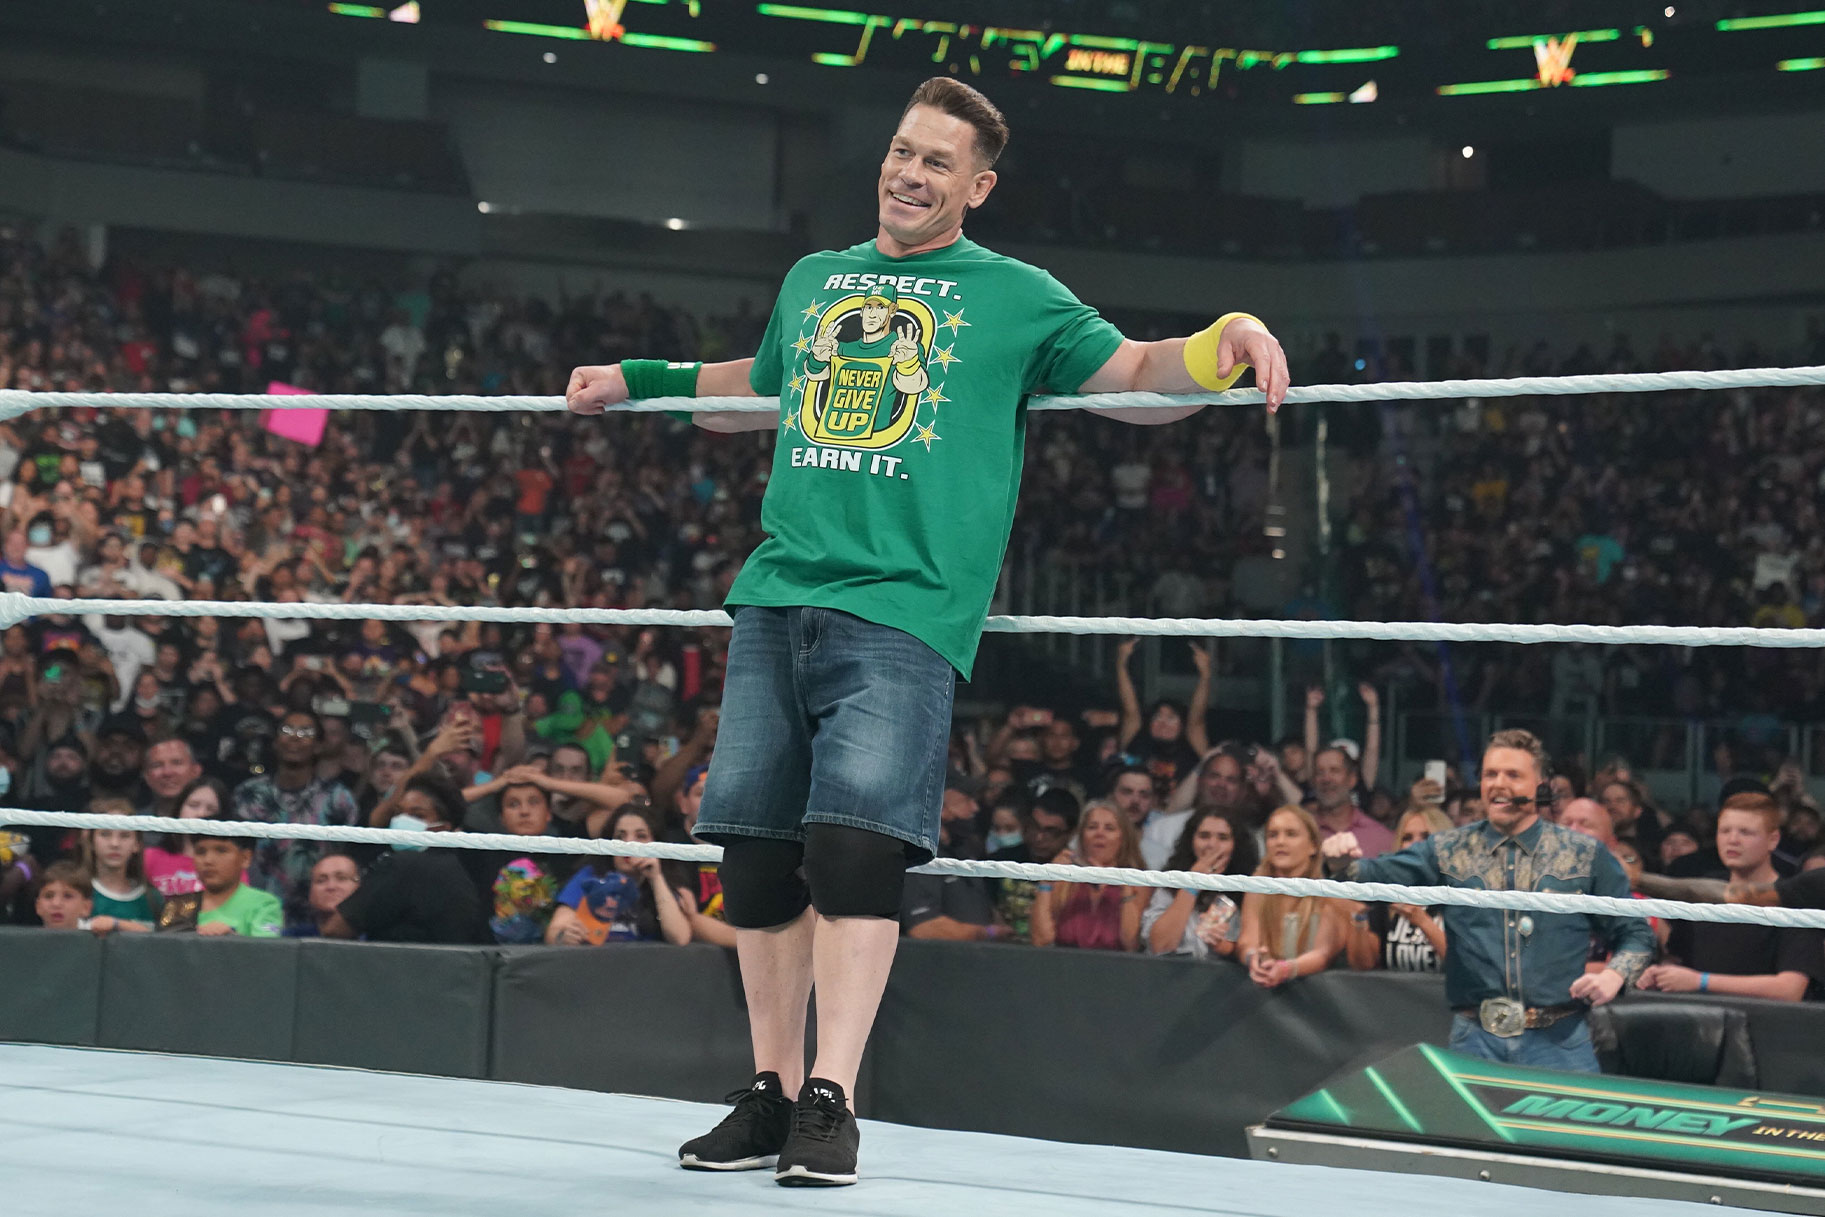 John Cena leaning against the top rope, wearing a green shirt and denim shorts